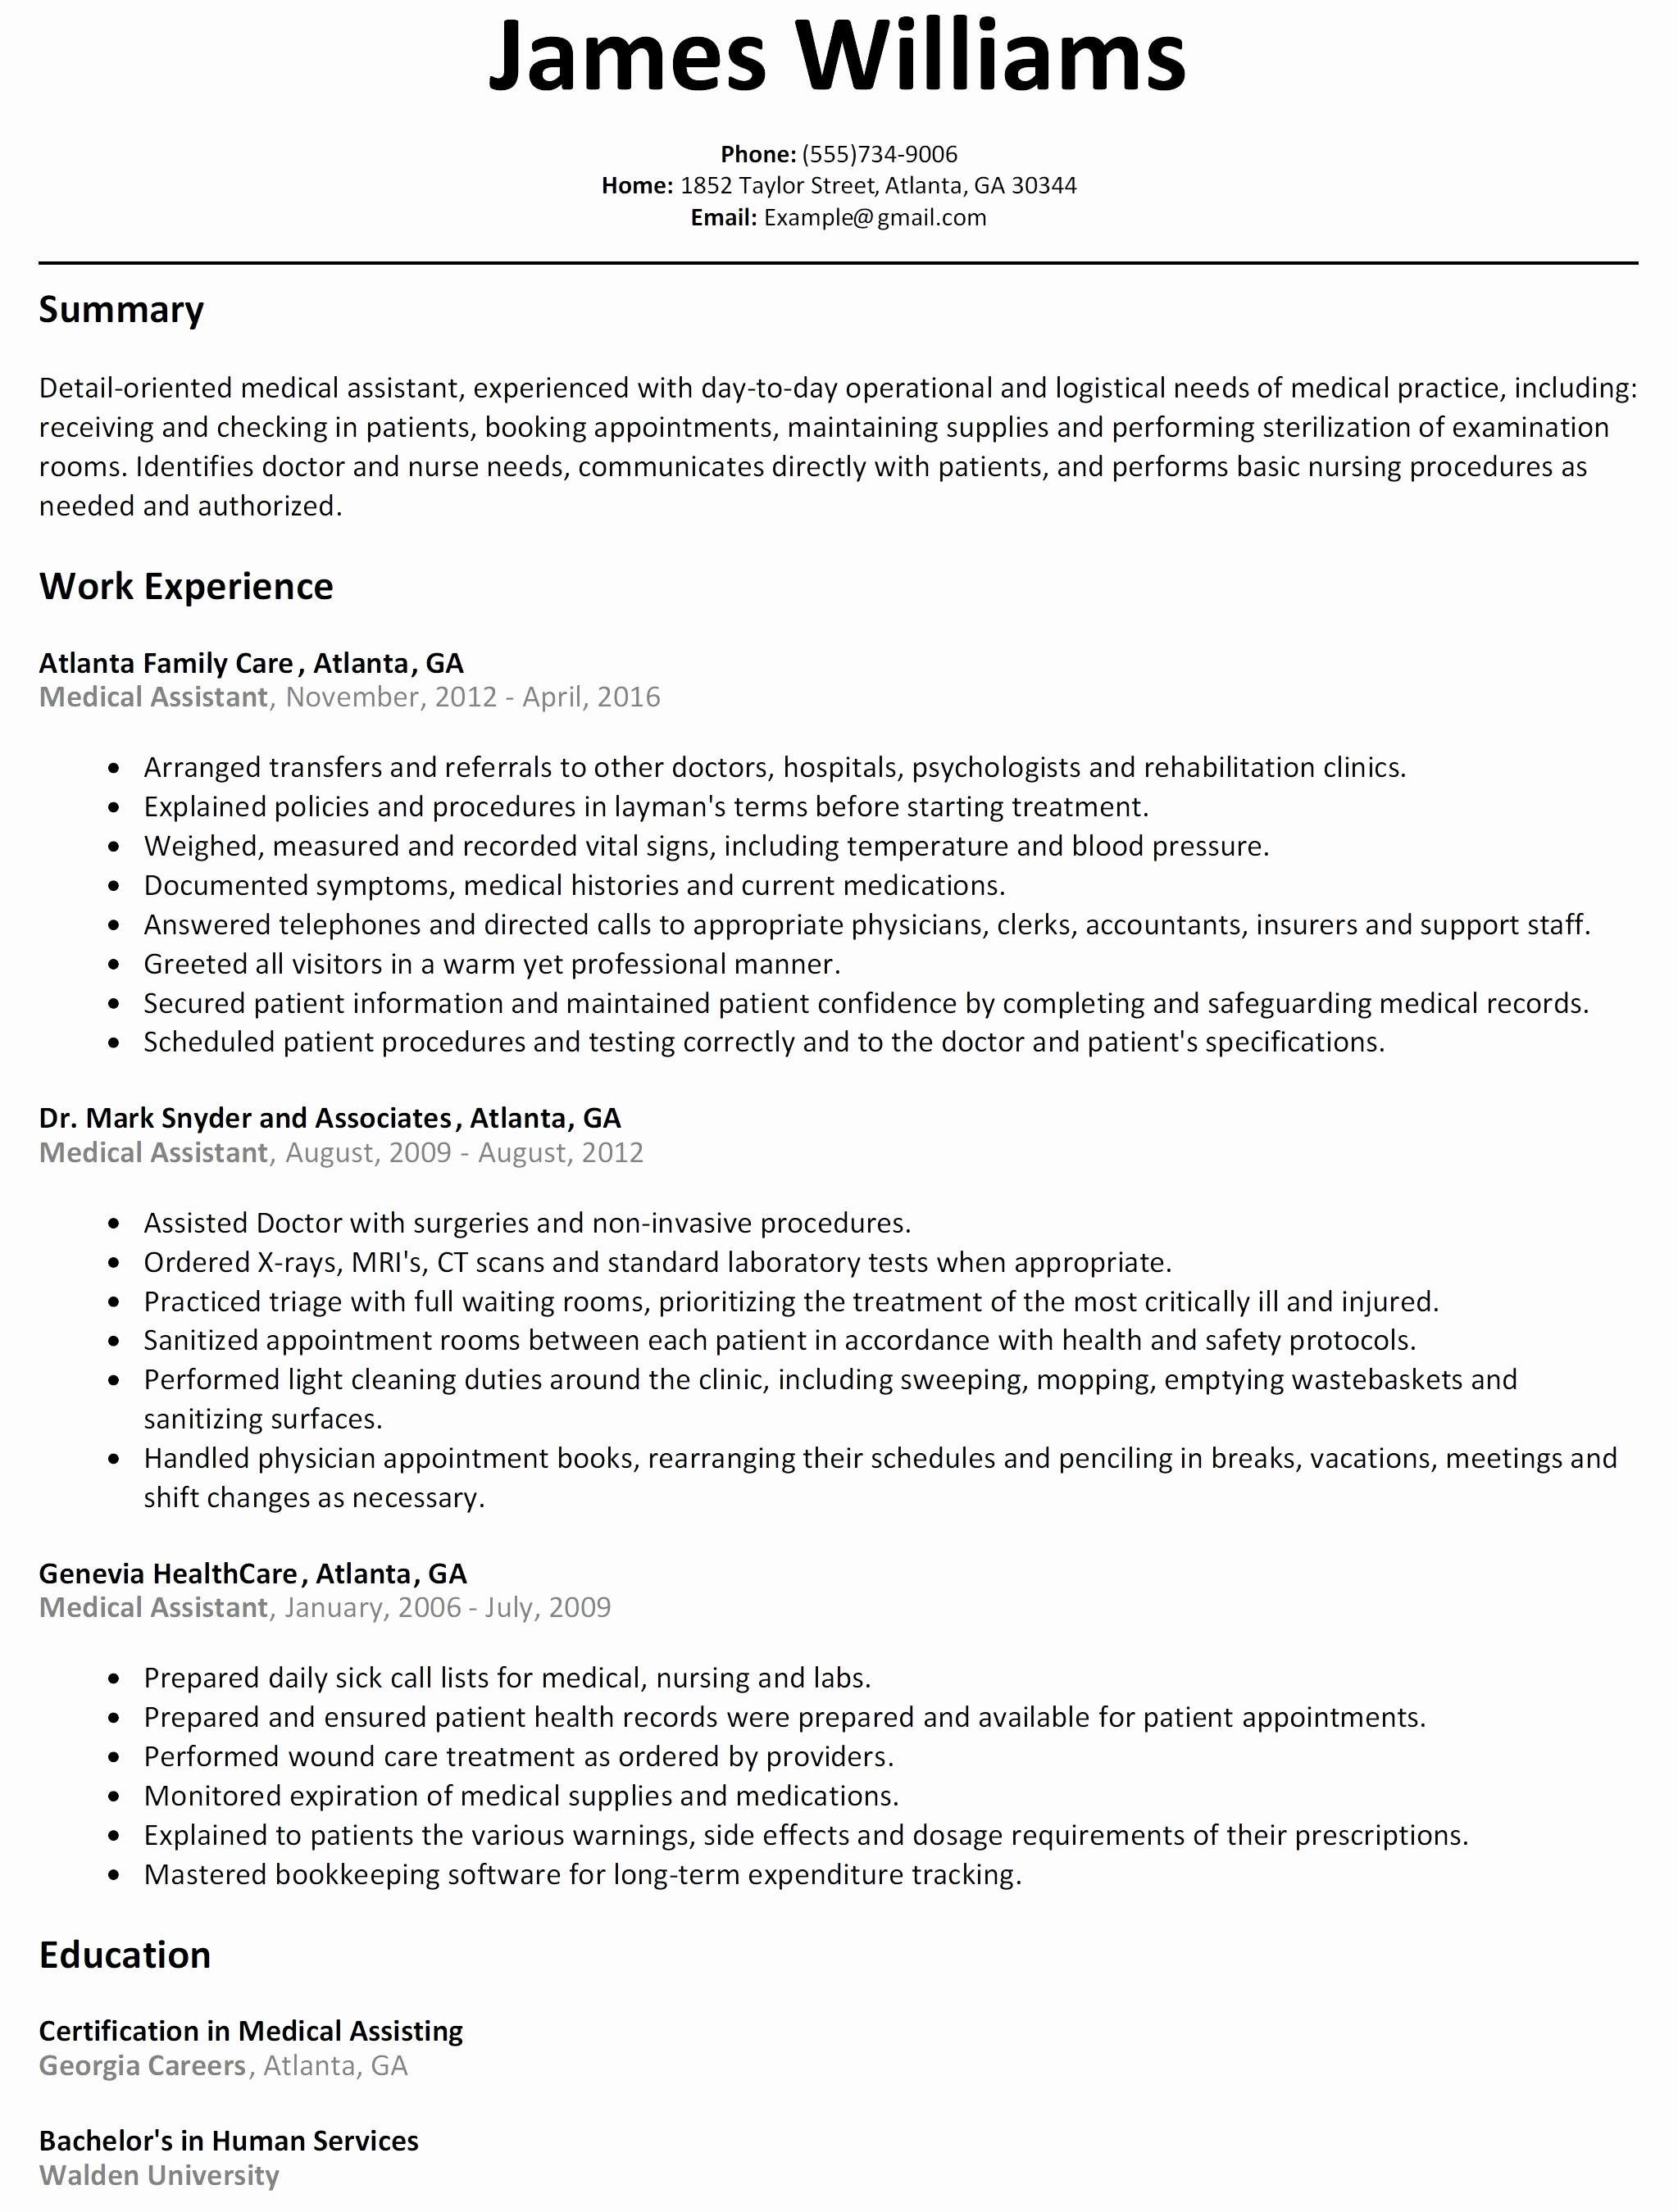 Indeed Cover Letter Template - Example Job Resume Inspirational Indeed Jobs Resume Elegant Free